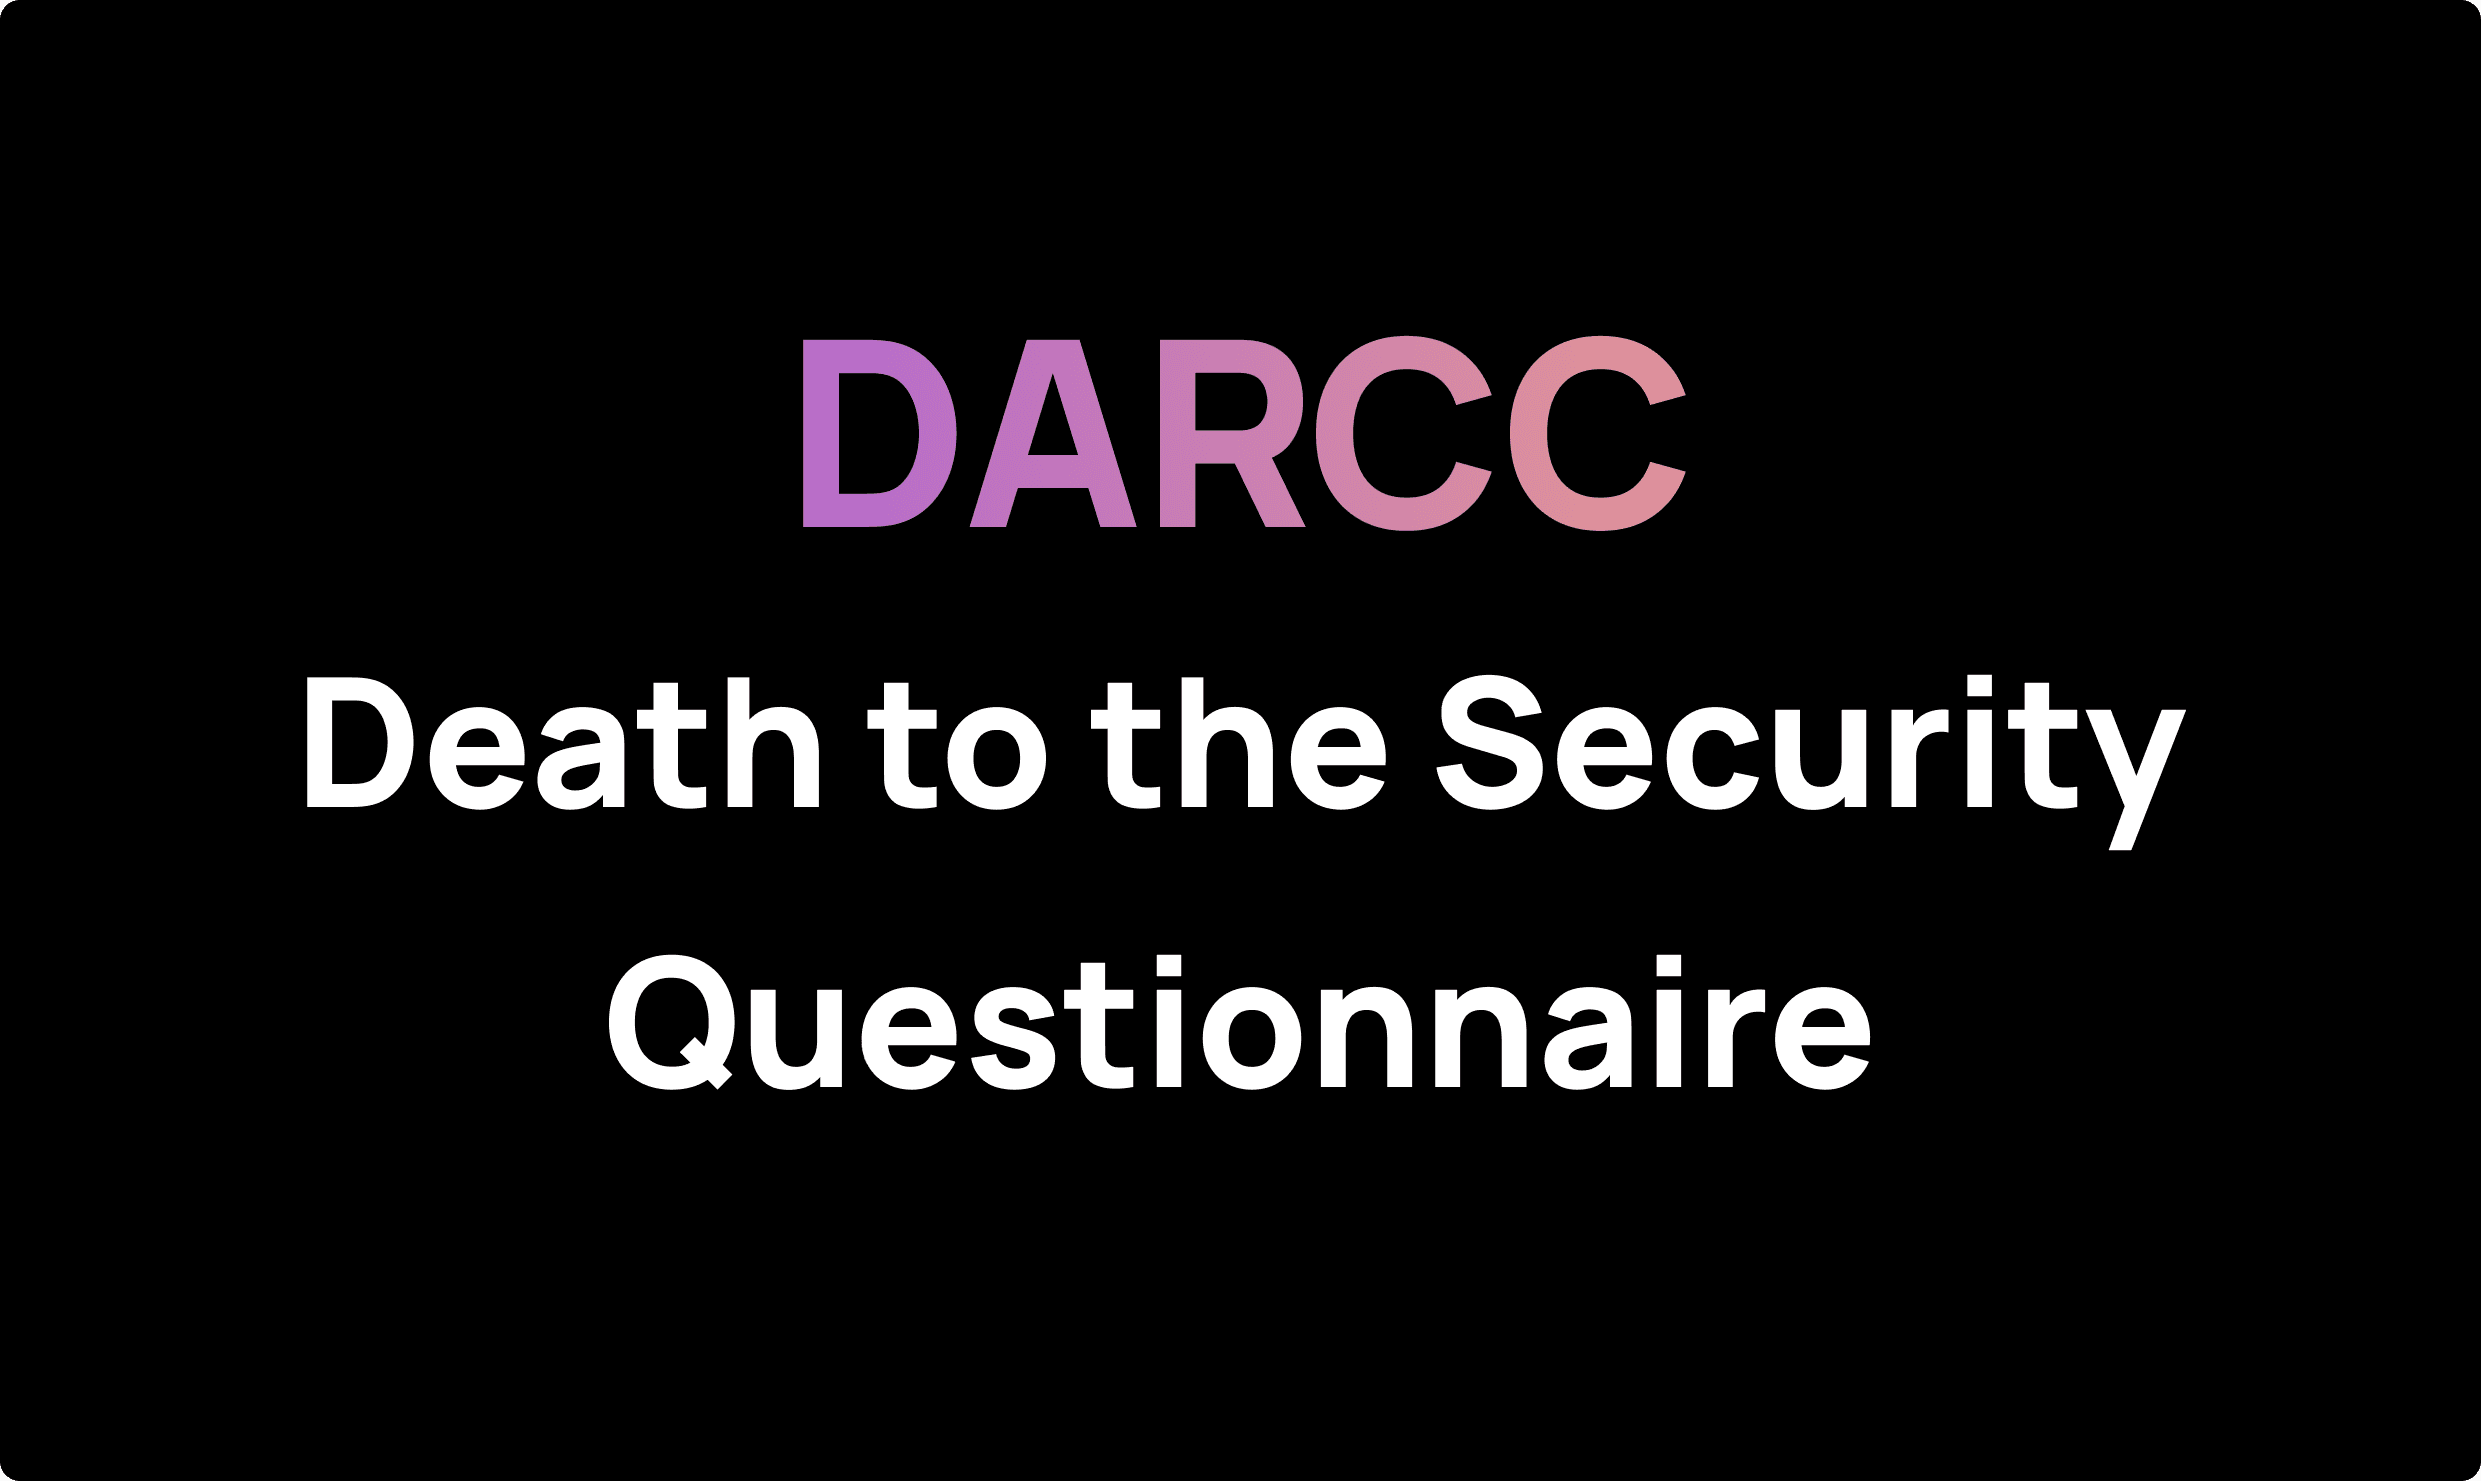 DARCC - The five layers of Modern App Security